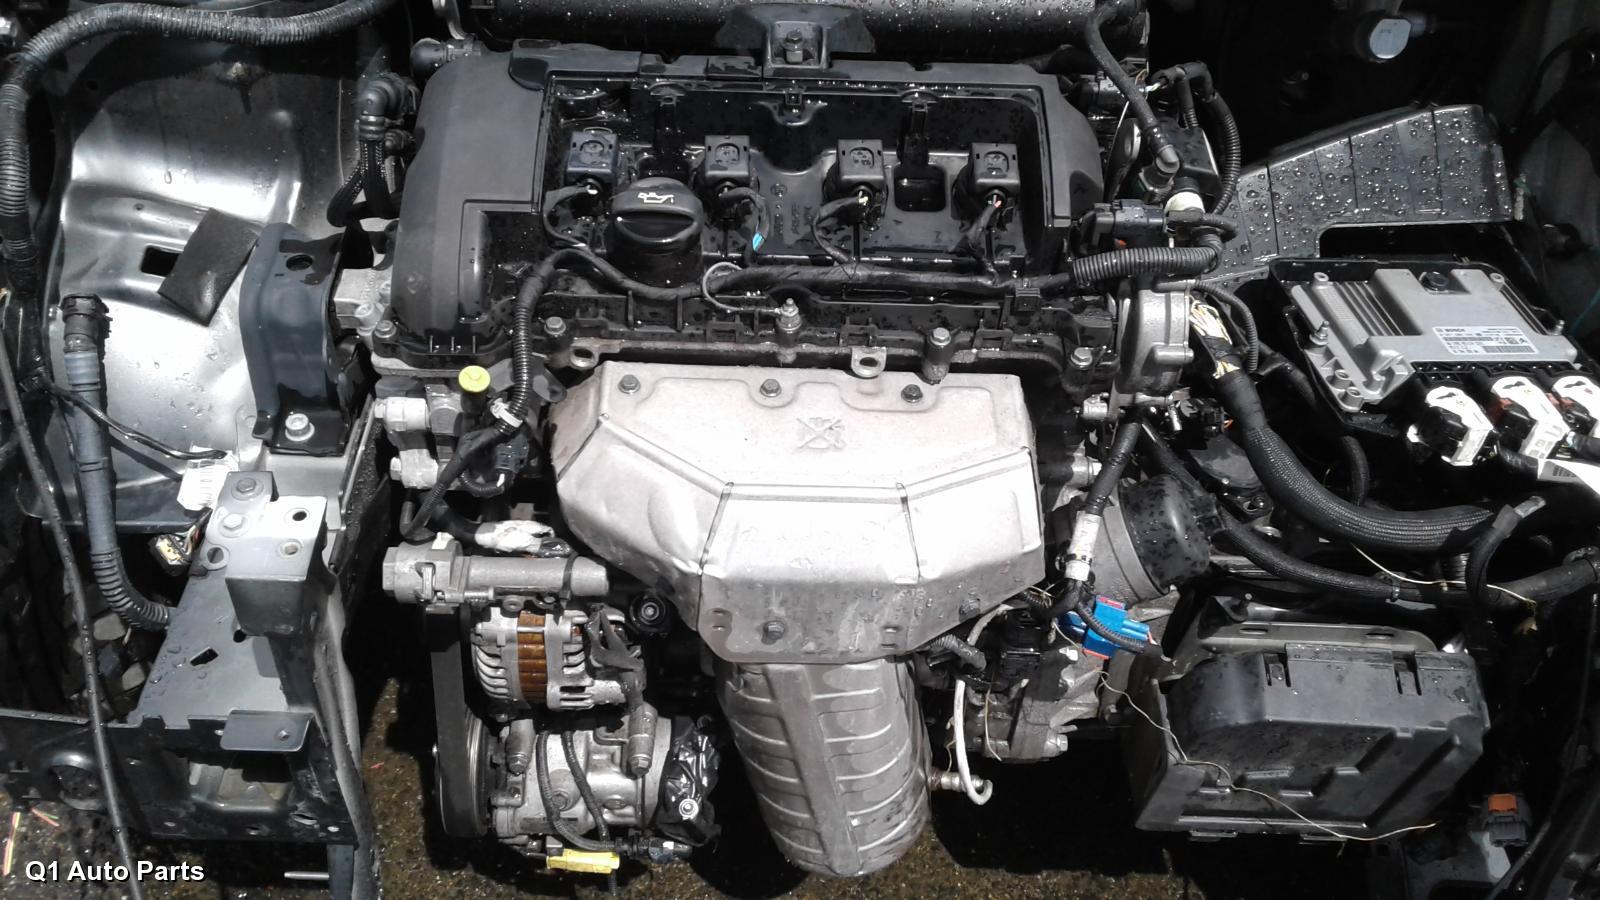 Second Hand Peugeot Engines